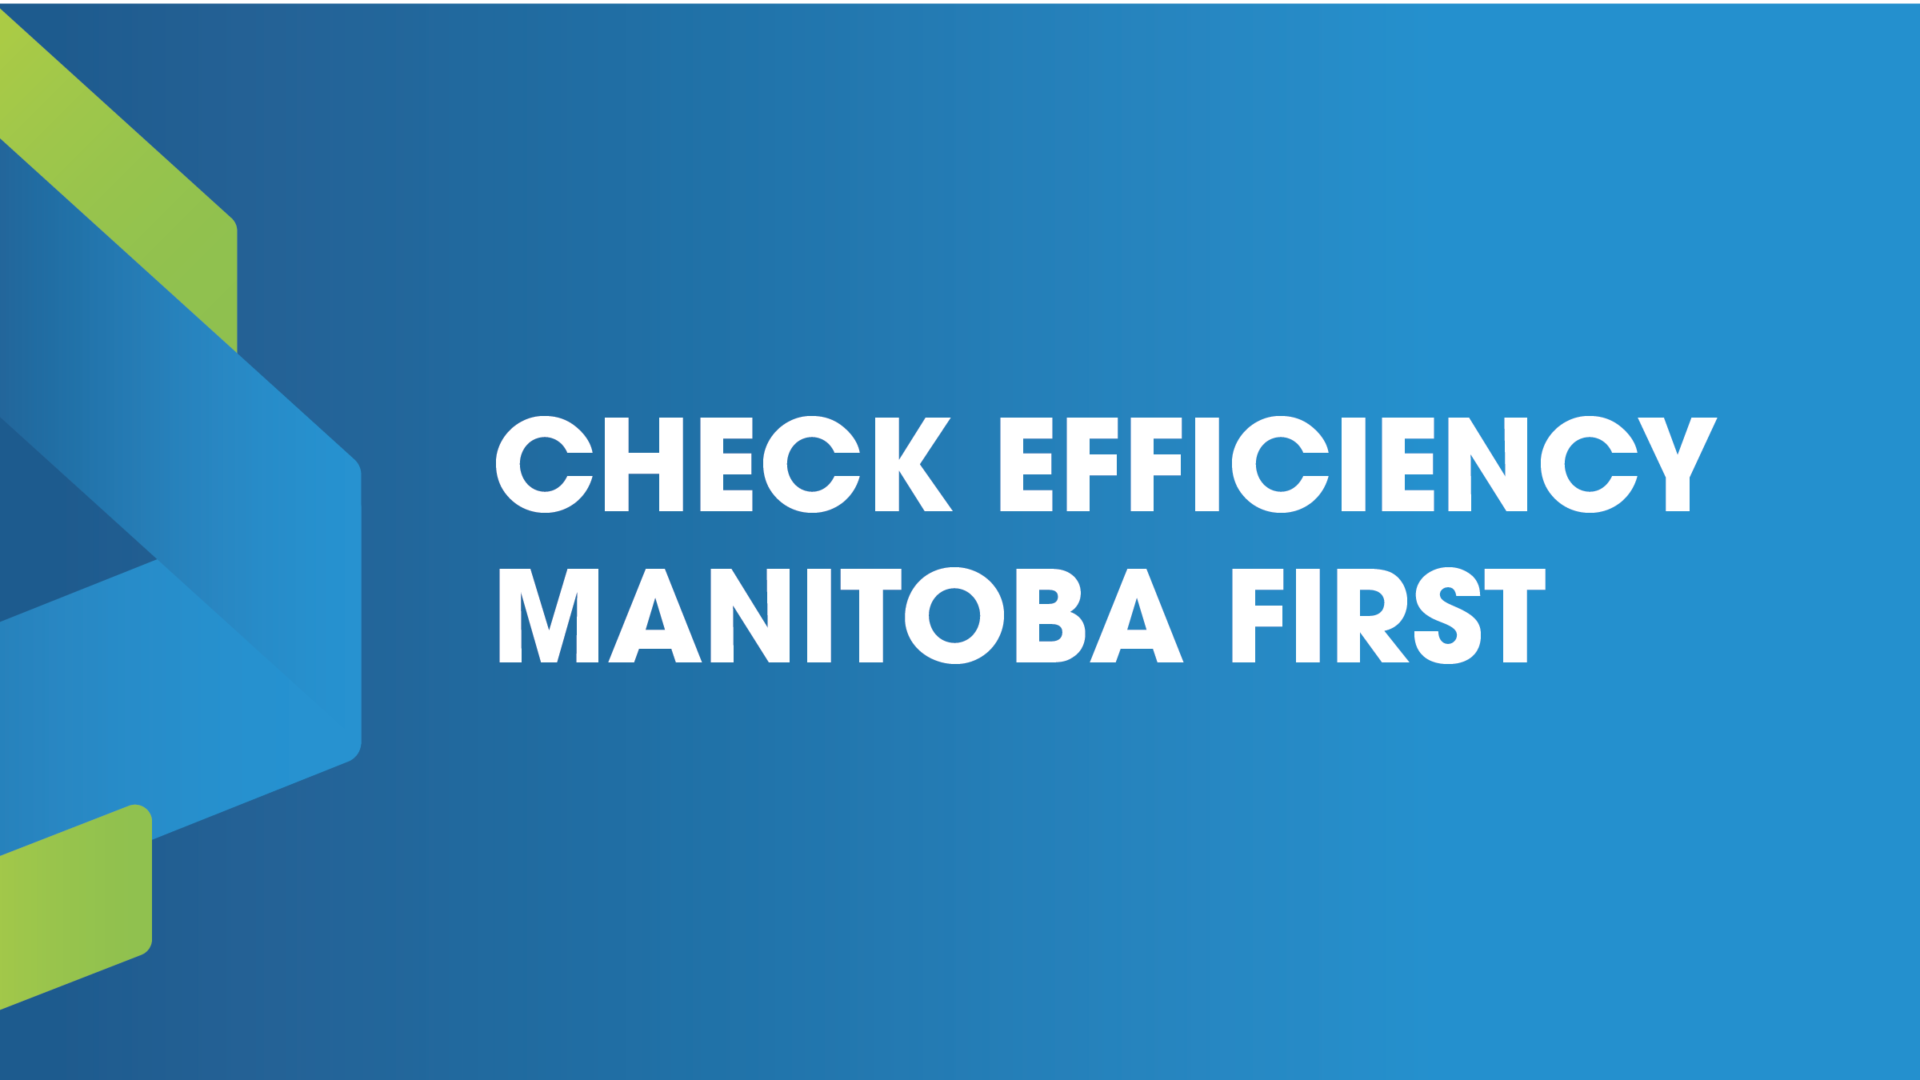 Rising home renovation costs means it’s best to check Efficiency Manitoba first for savings